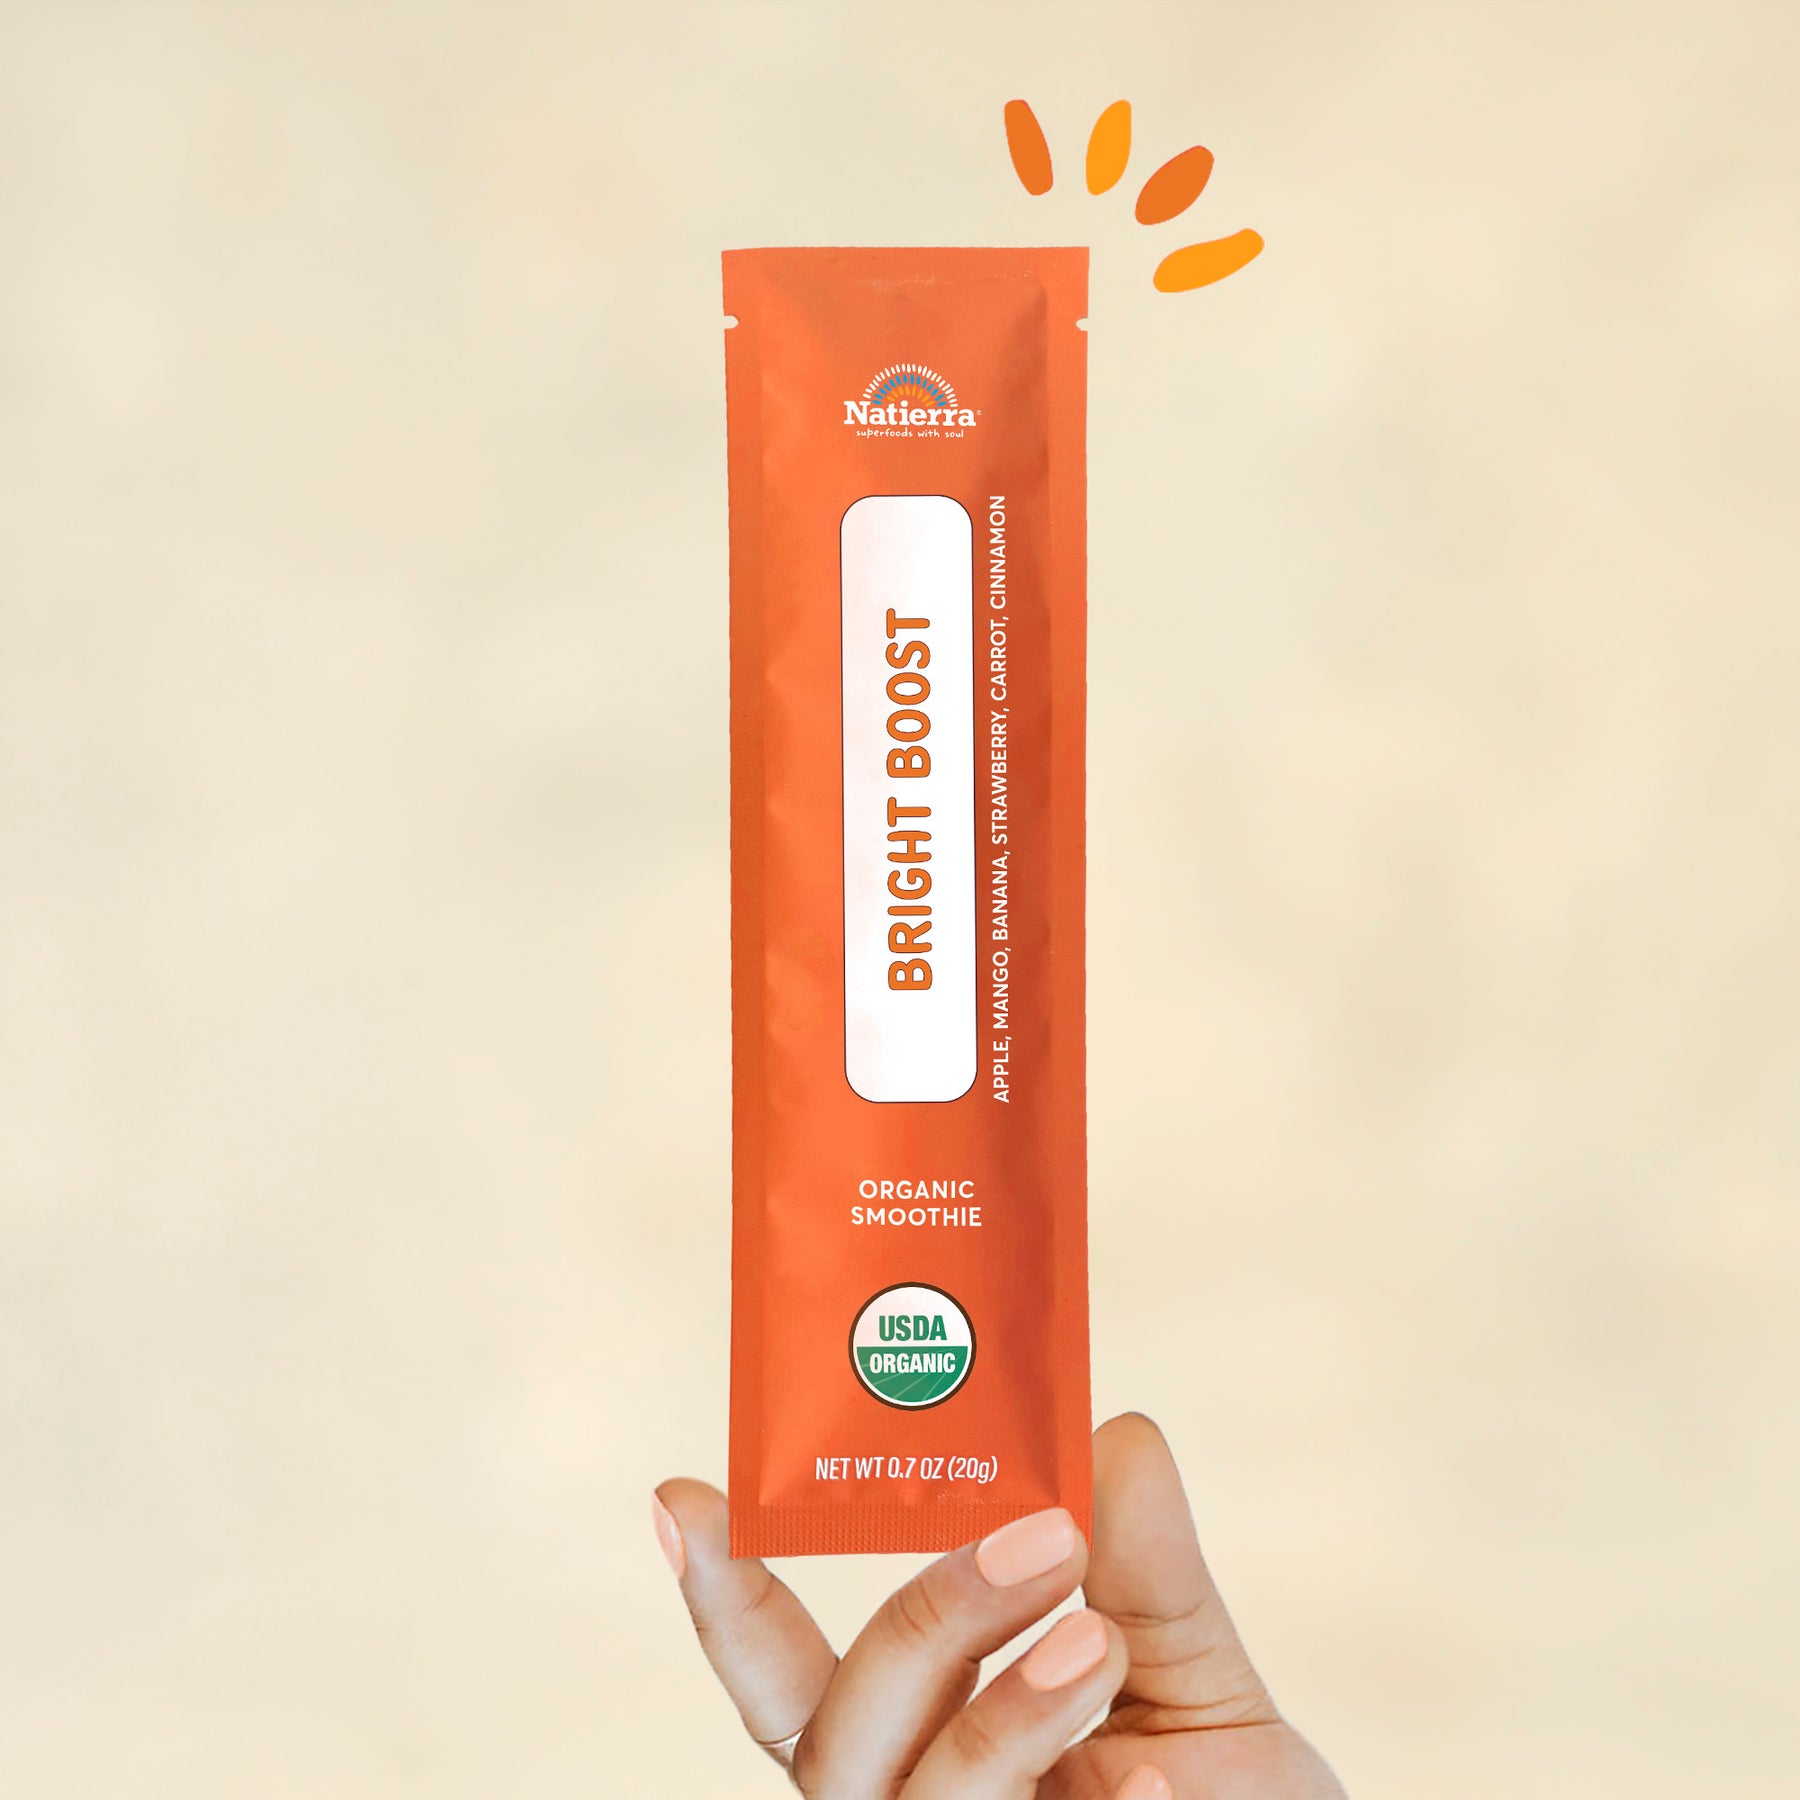 Individual stick pack of Natierra's Bright Boost Organic Smoothie held by a hand in front of a creme background